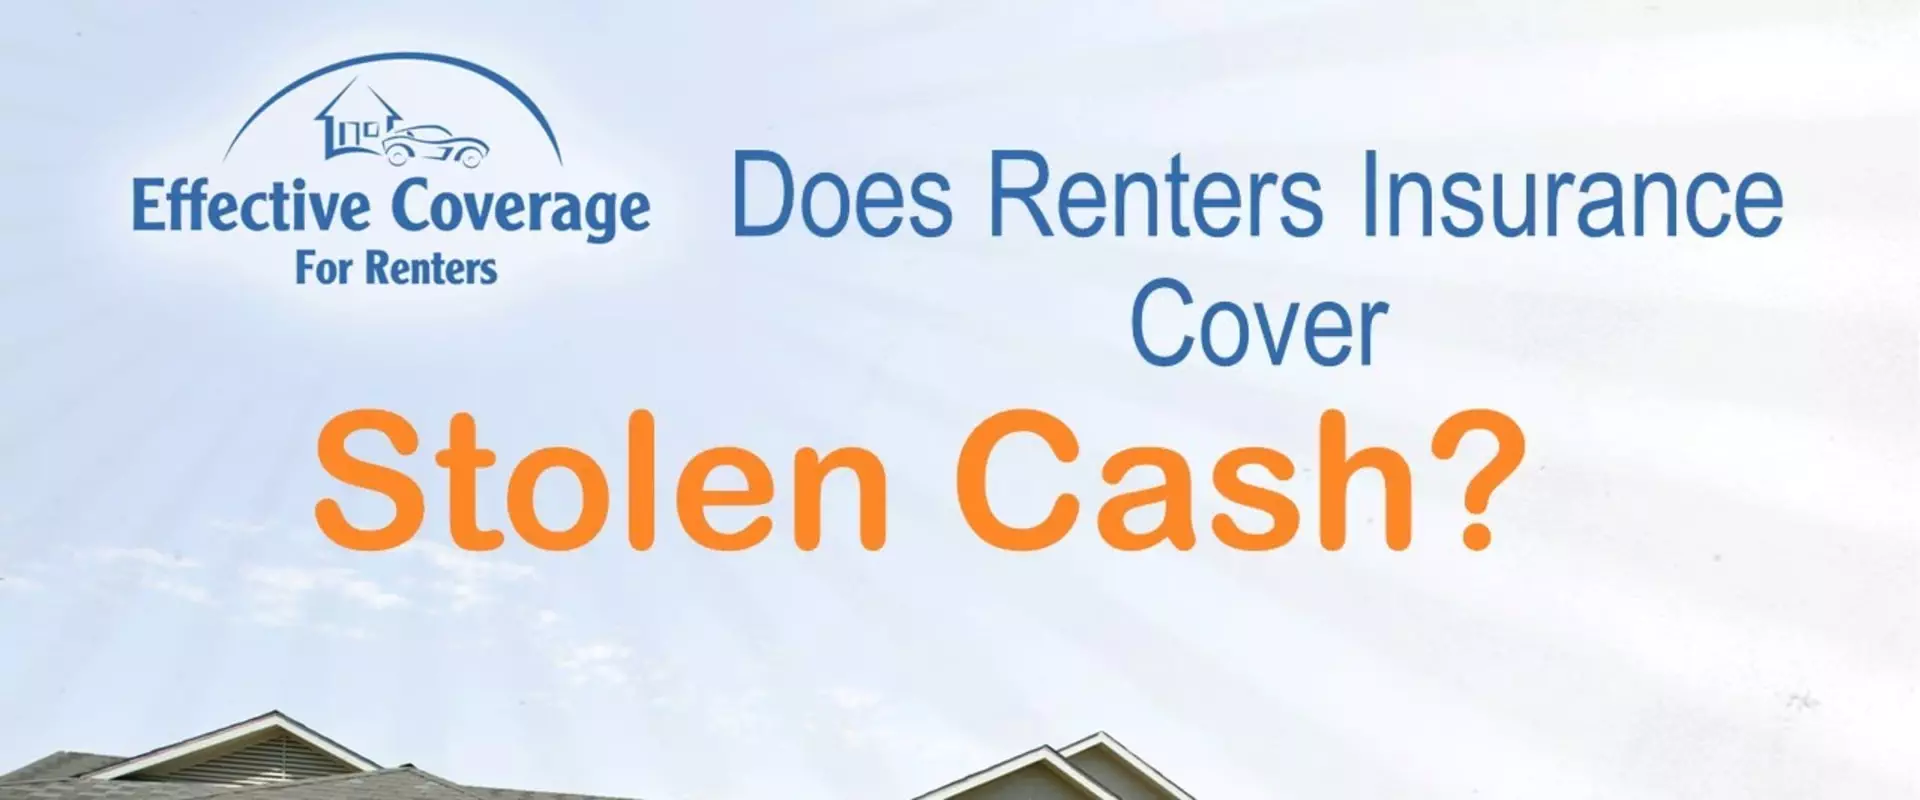 How much does renter’s insurance cost for 100,000?